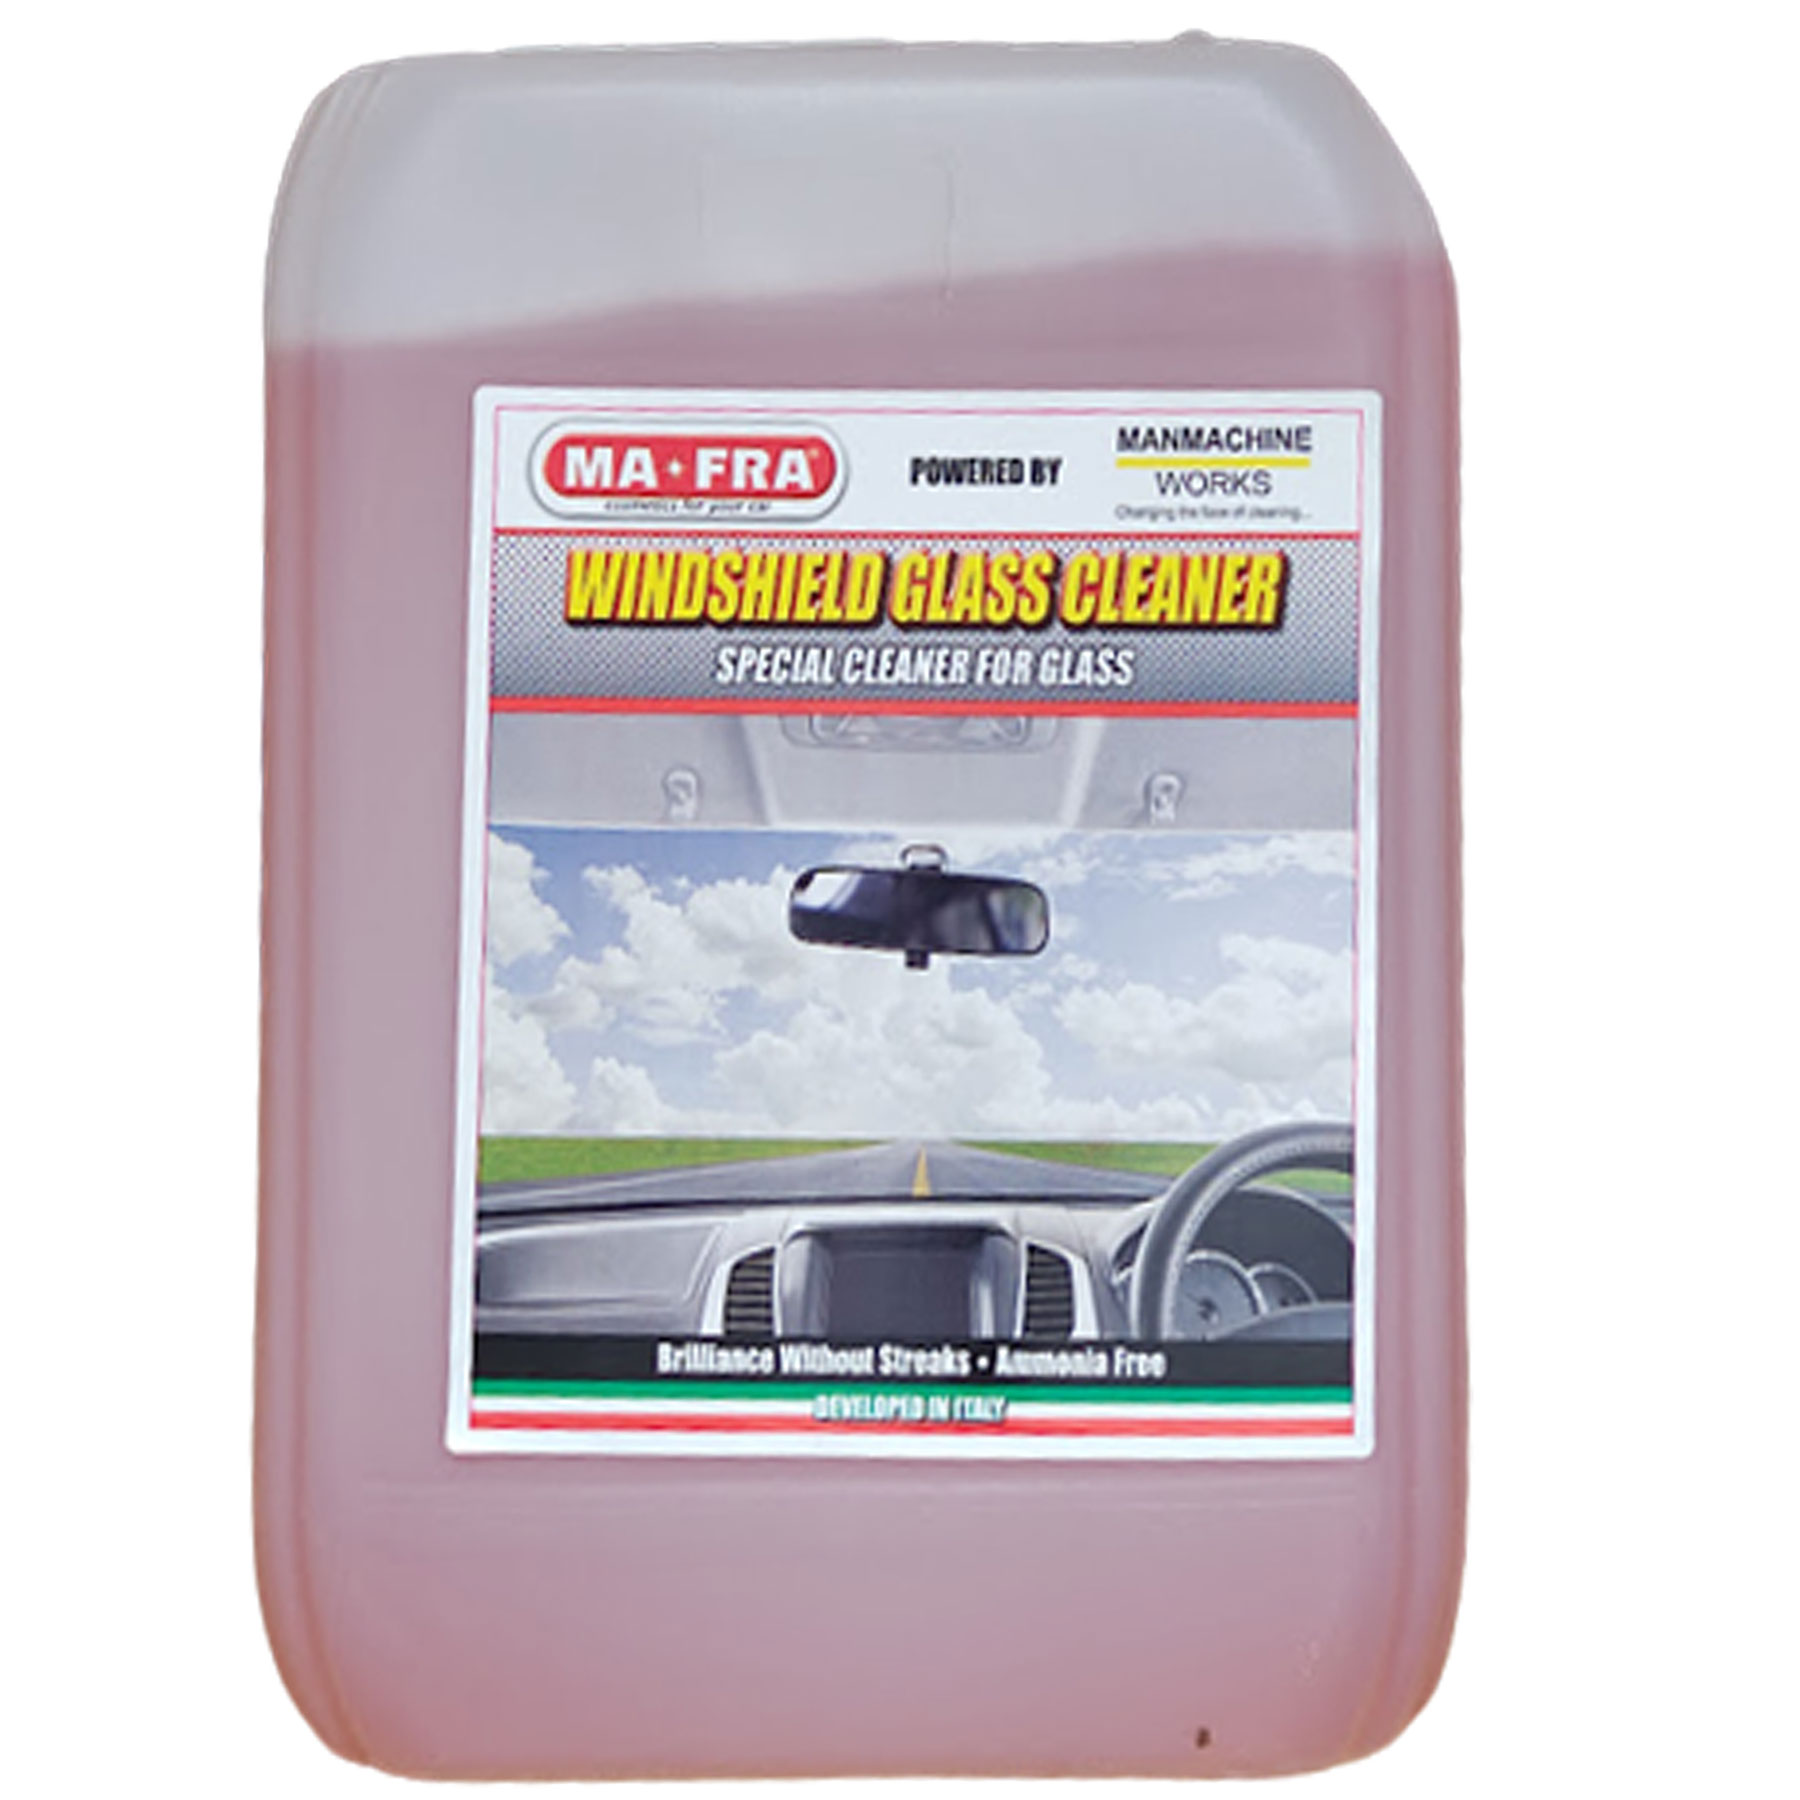 Windshield Glass Cleaner